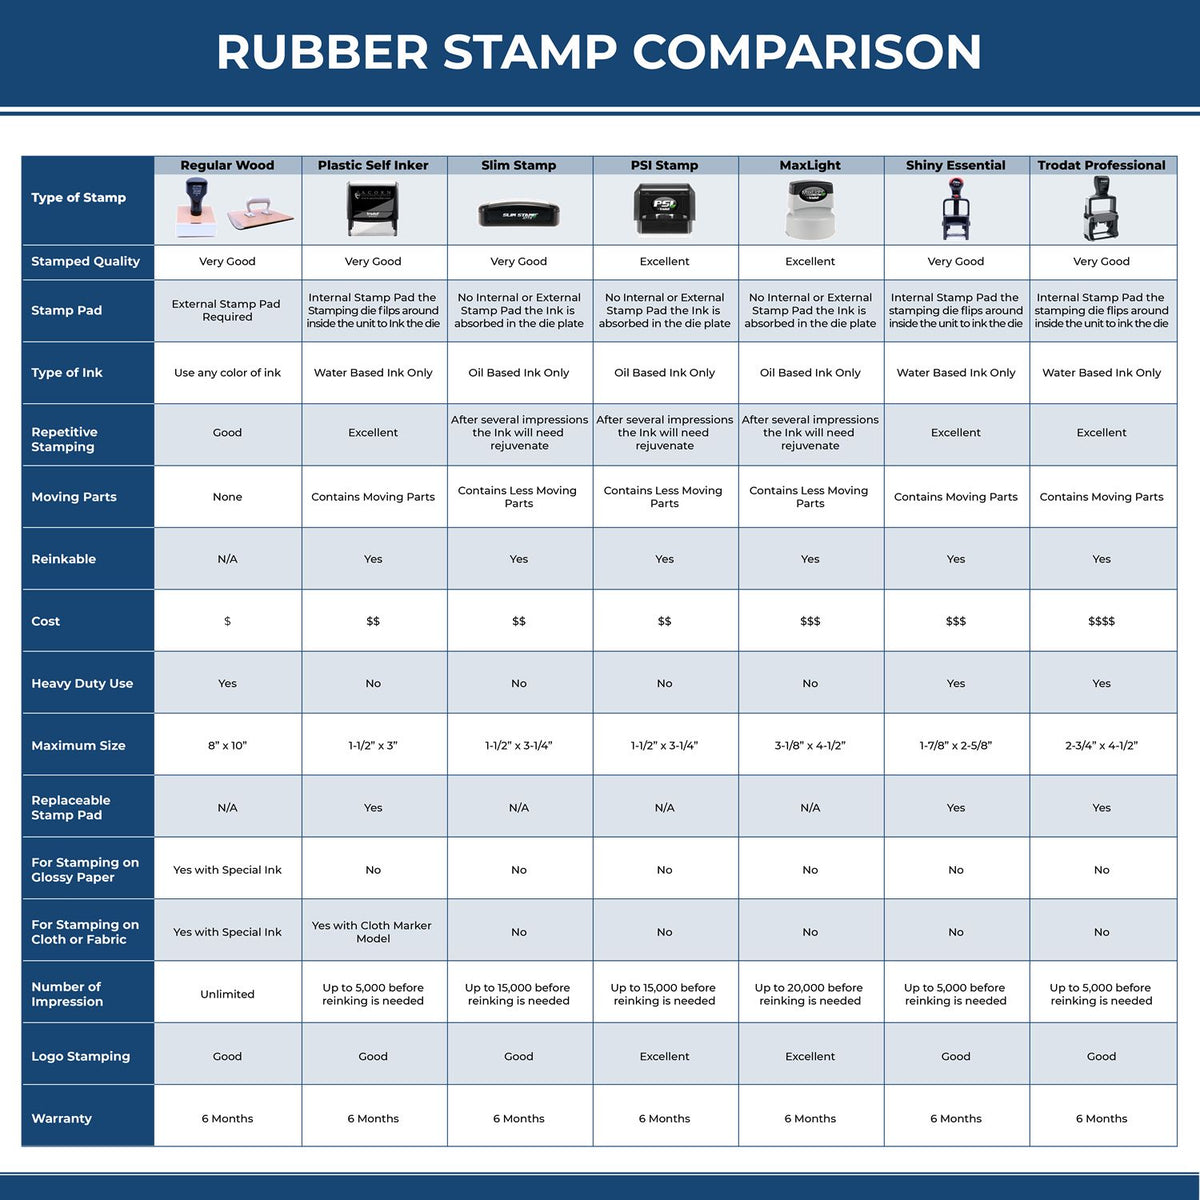 Round Thumbs Up Rubber Stamp 5810R Rubber Stamp Comparison